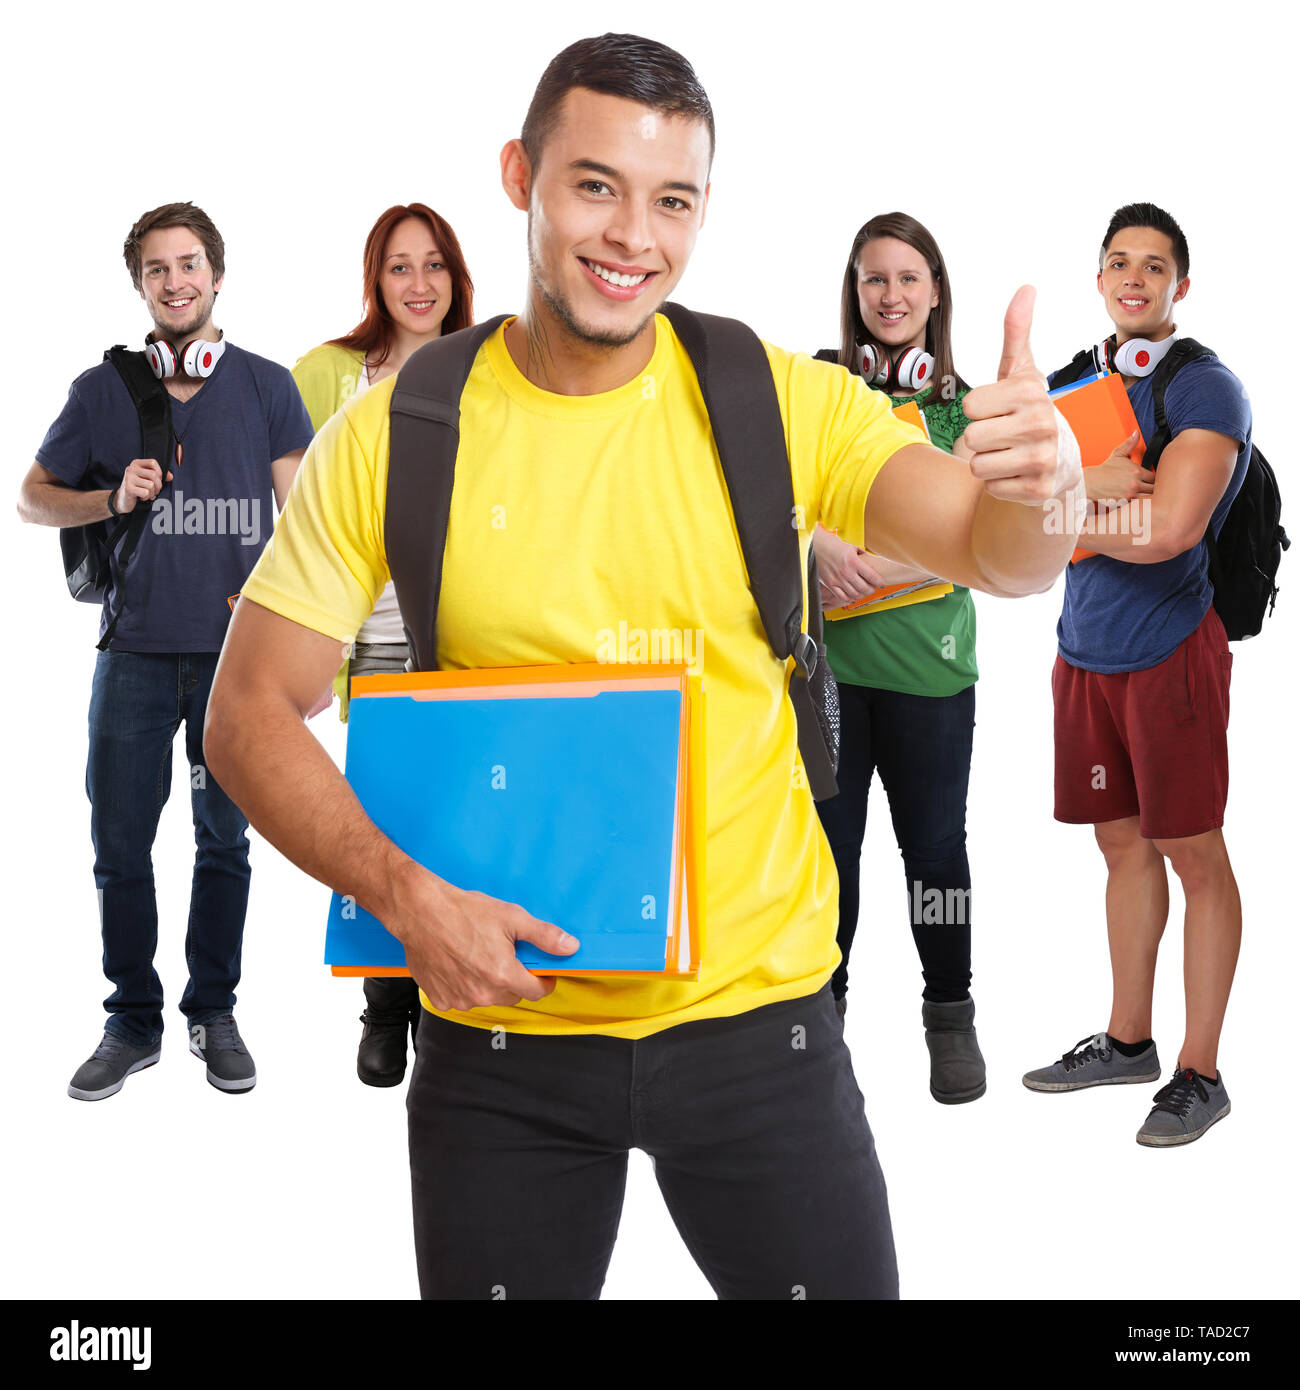 Group of students success successful thumbs up smiling square people isolated on a white background Stock Photo